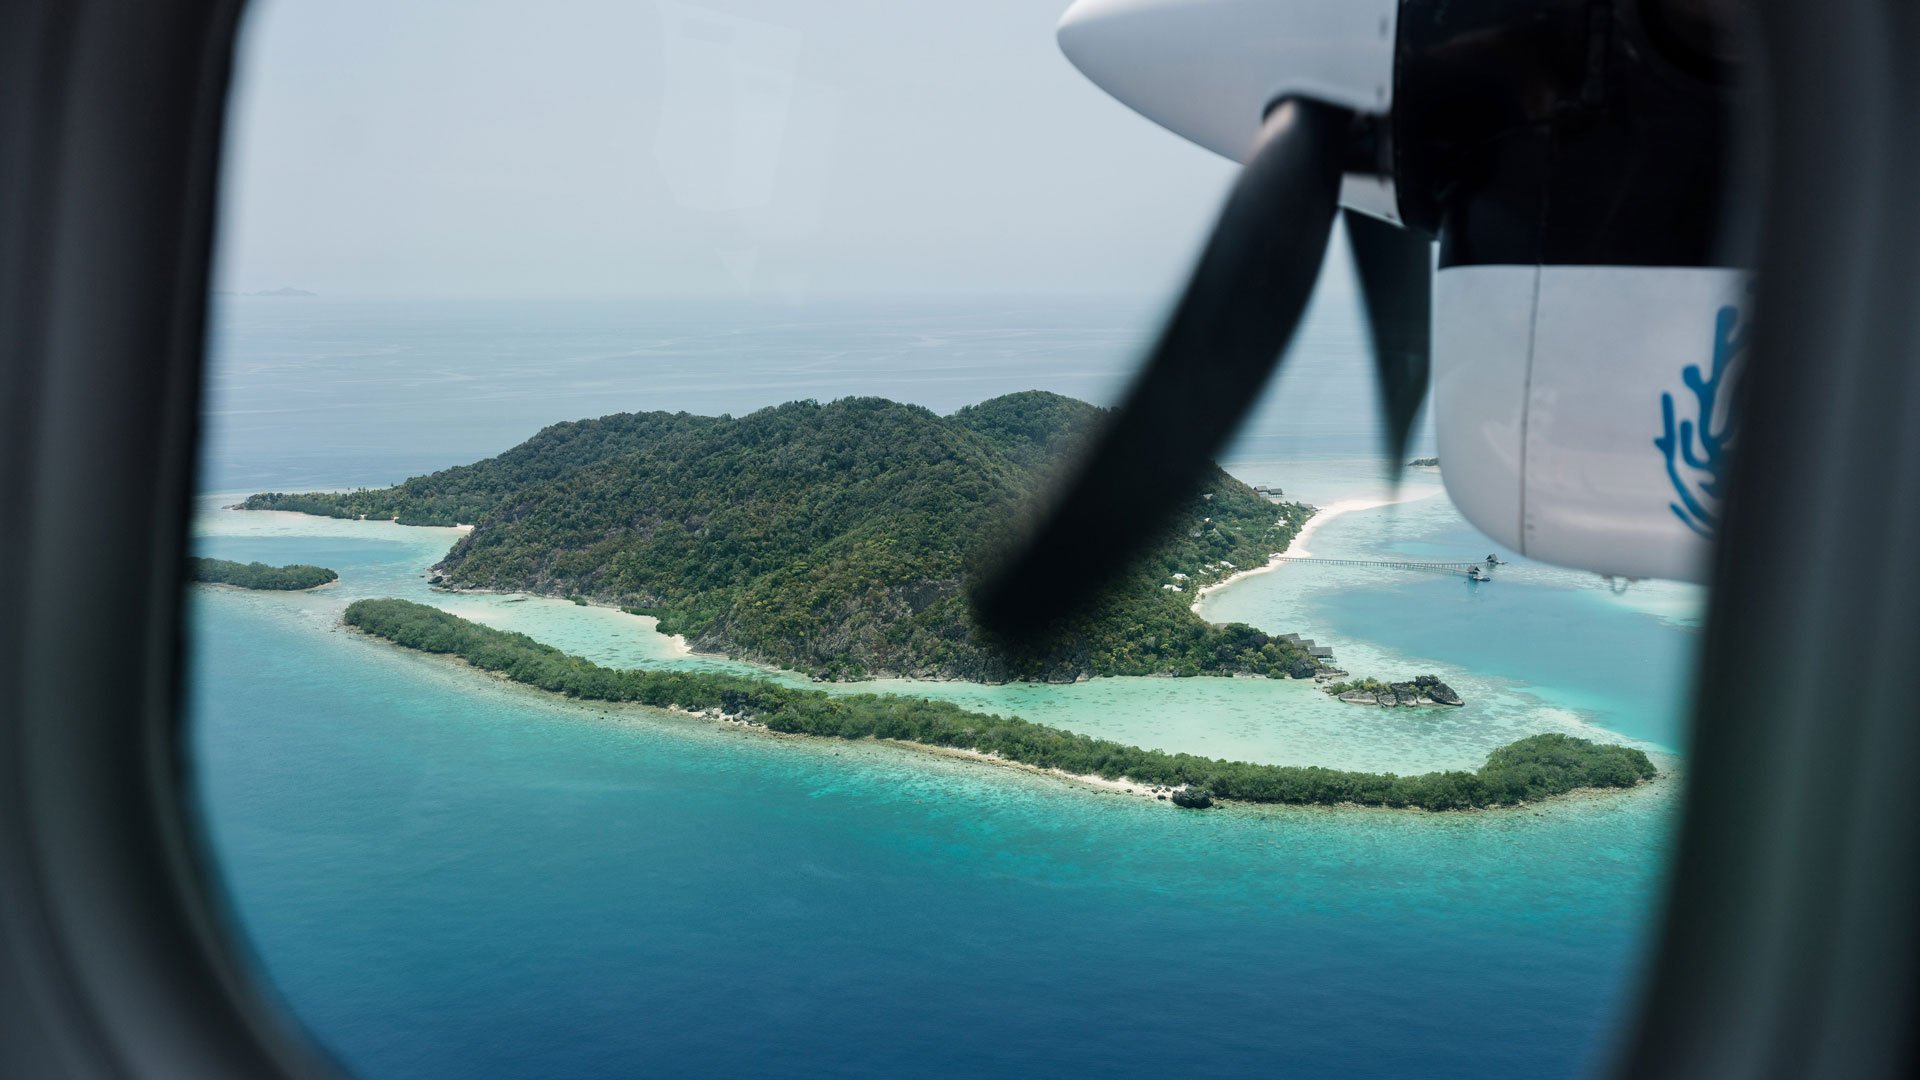 Bawahreserve_view_from_seaplane_zoom